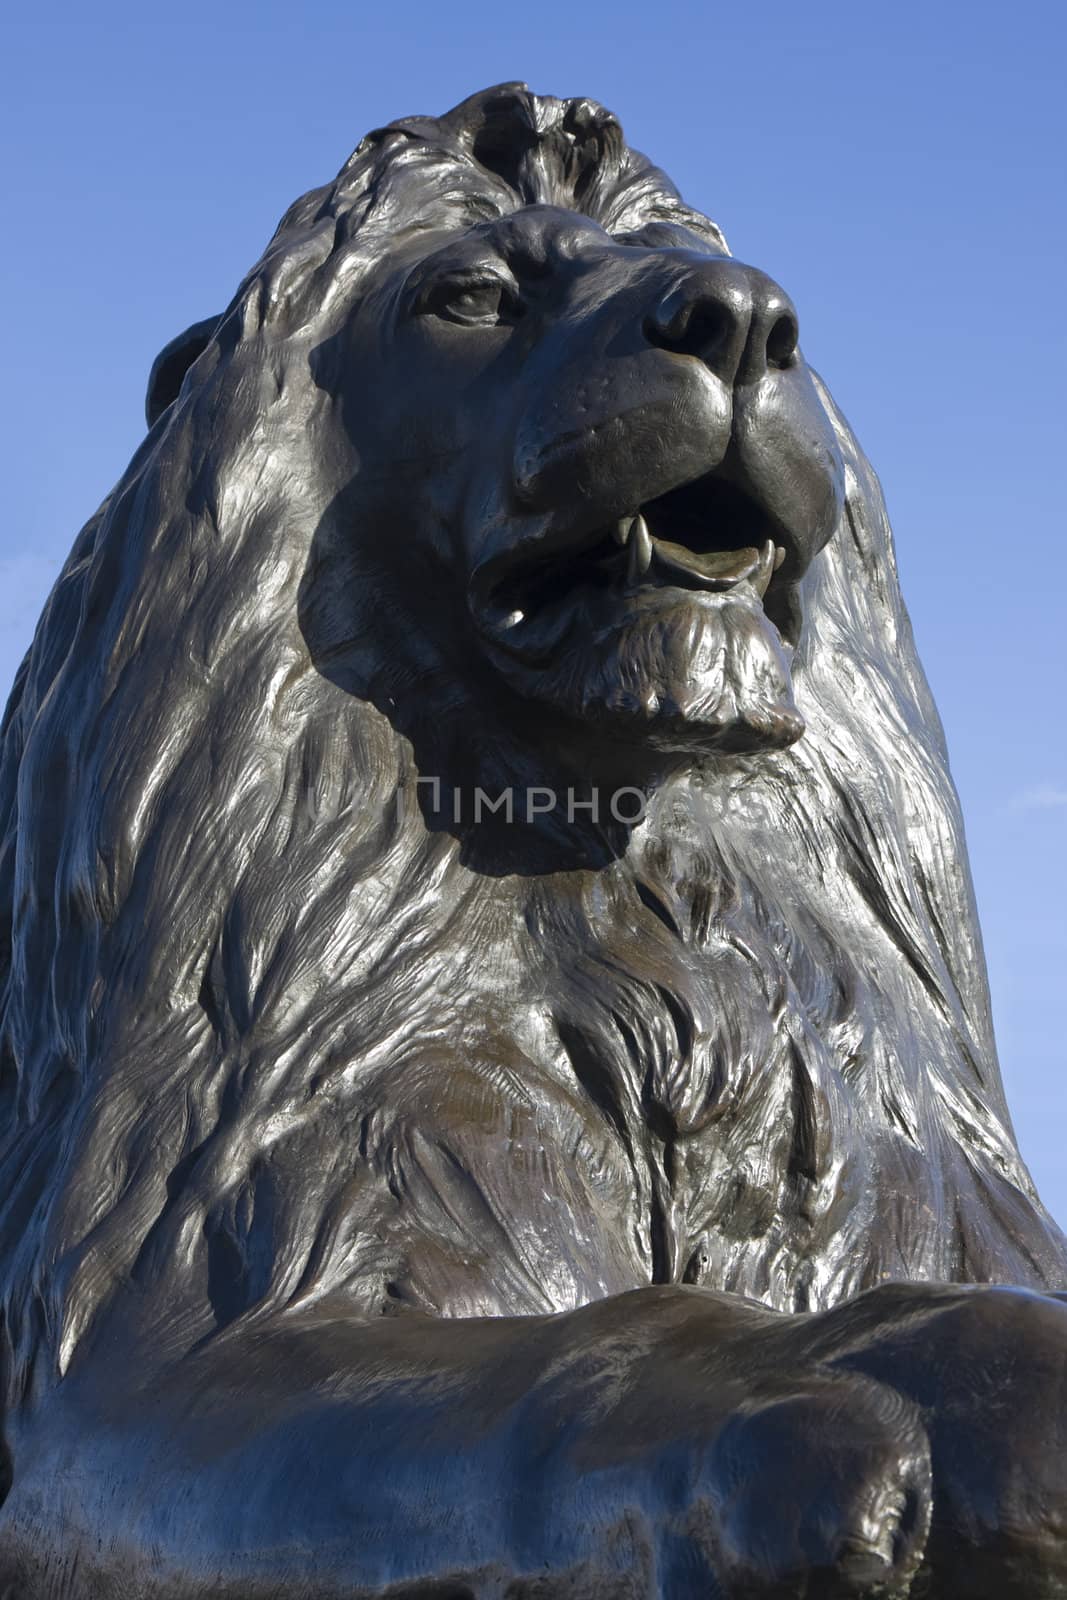 Close up of one of the bronze lions at Trafalgar Square, London, England.